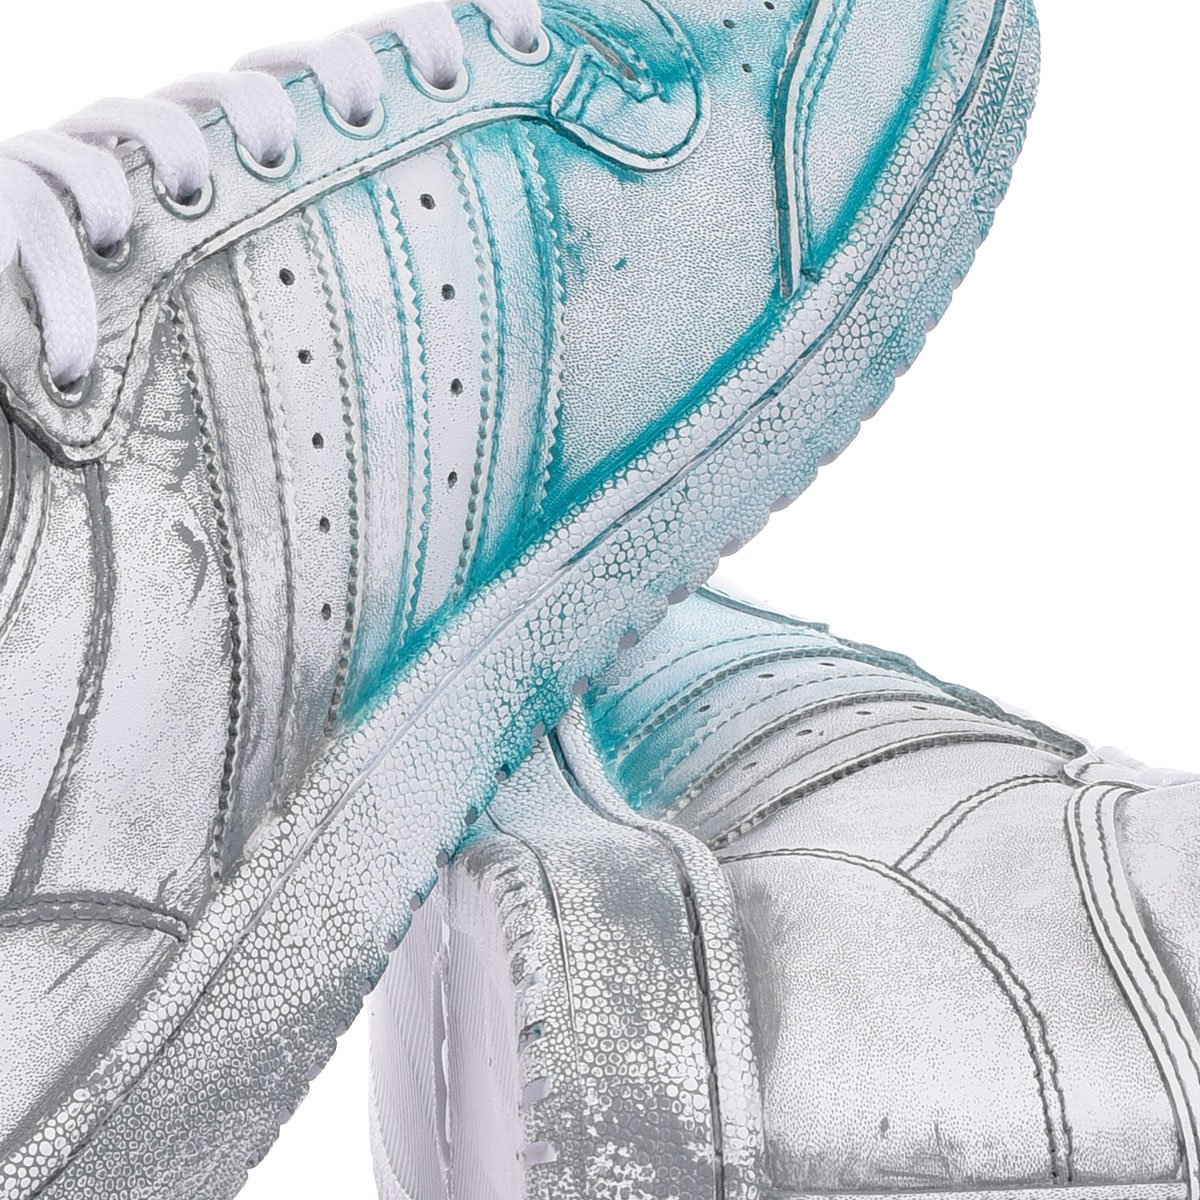 Adidas Top Ten Ice Top Ten Washed-out